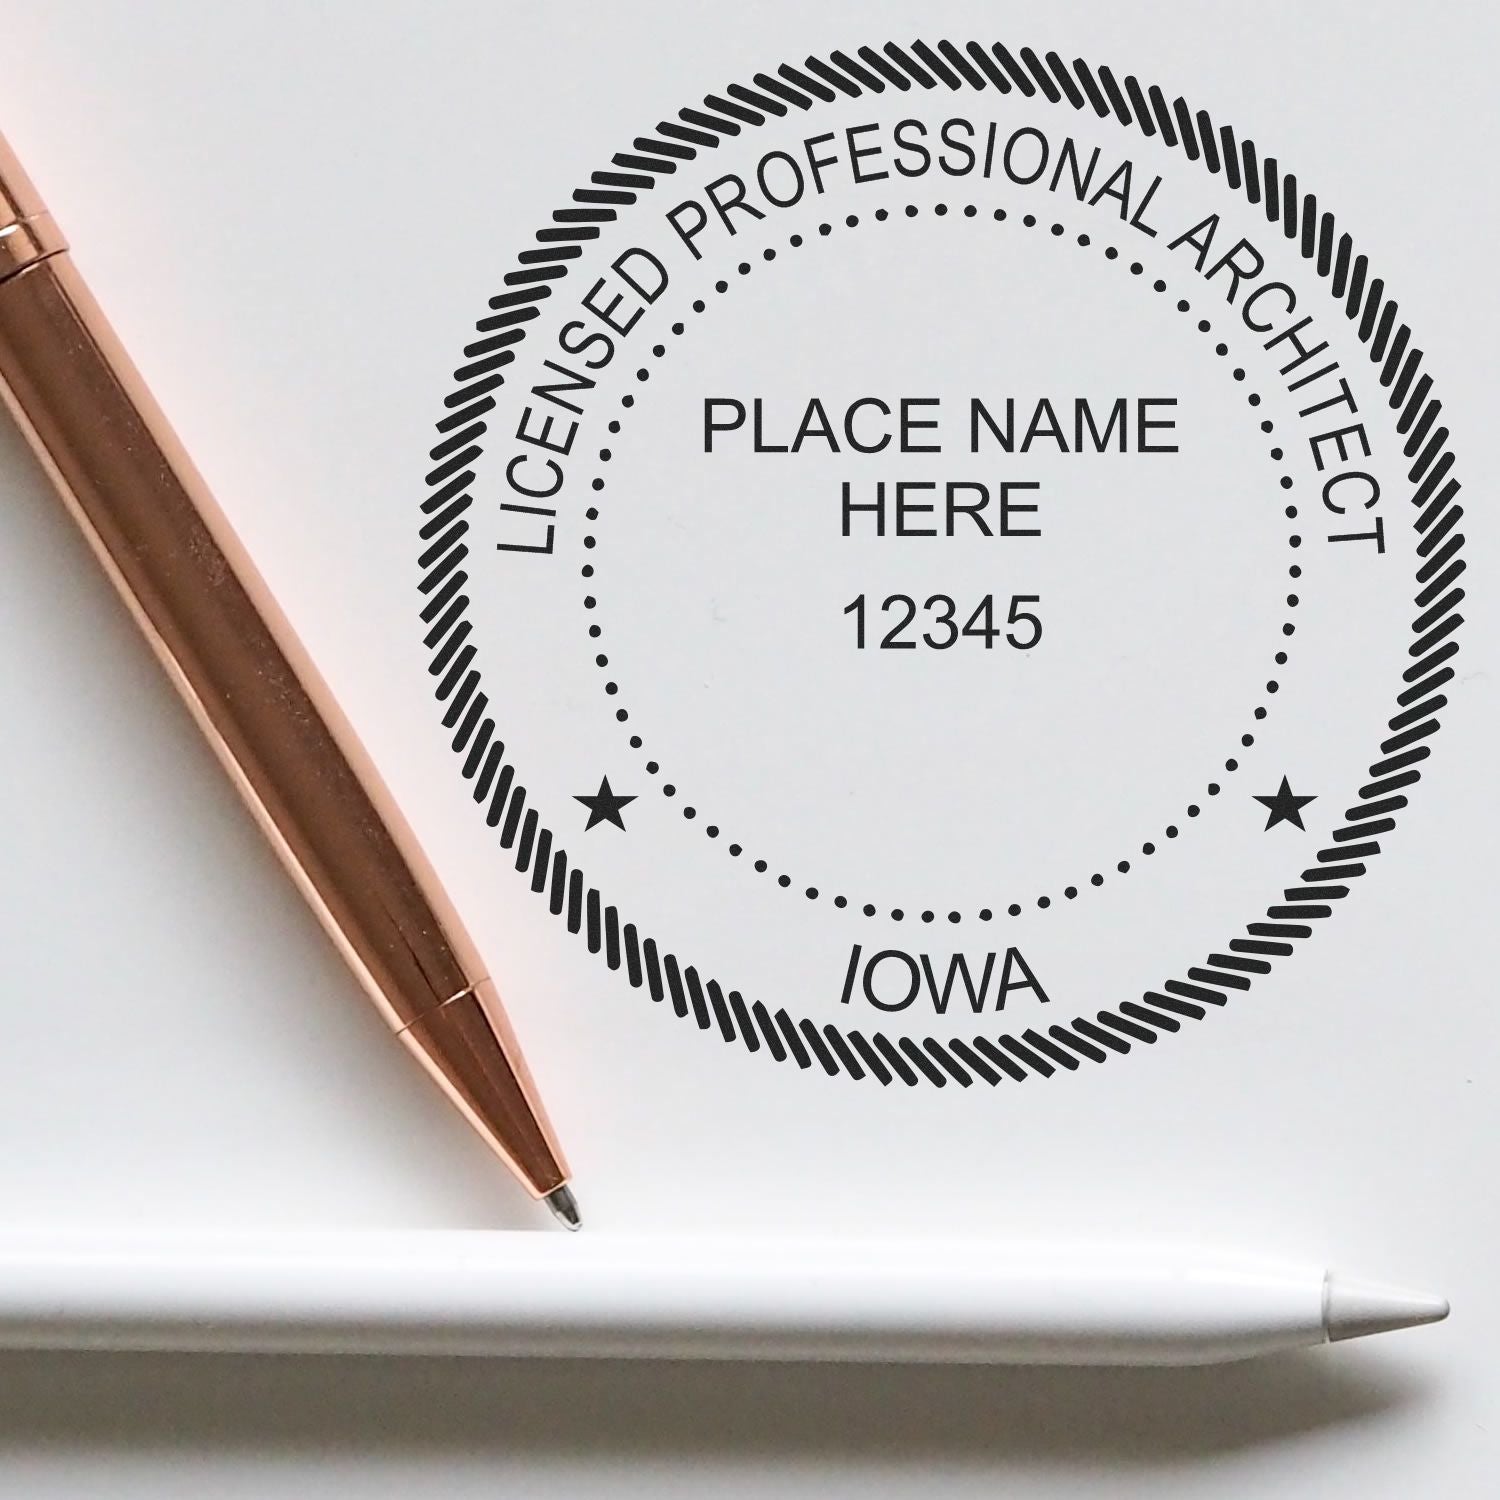 Unleash Your Creativity: Innovative Iowa Architect Stamp Designs Revealed feature image